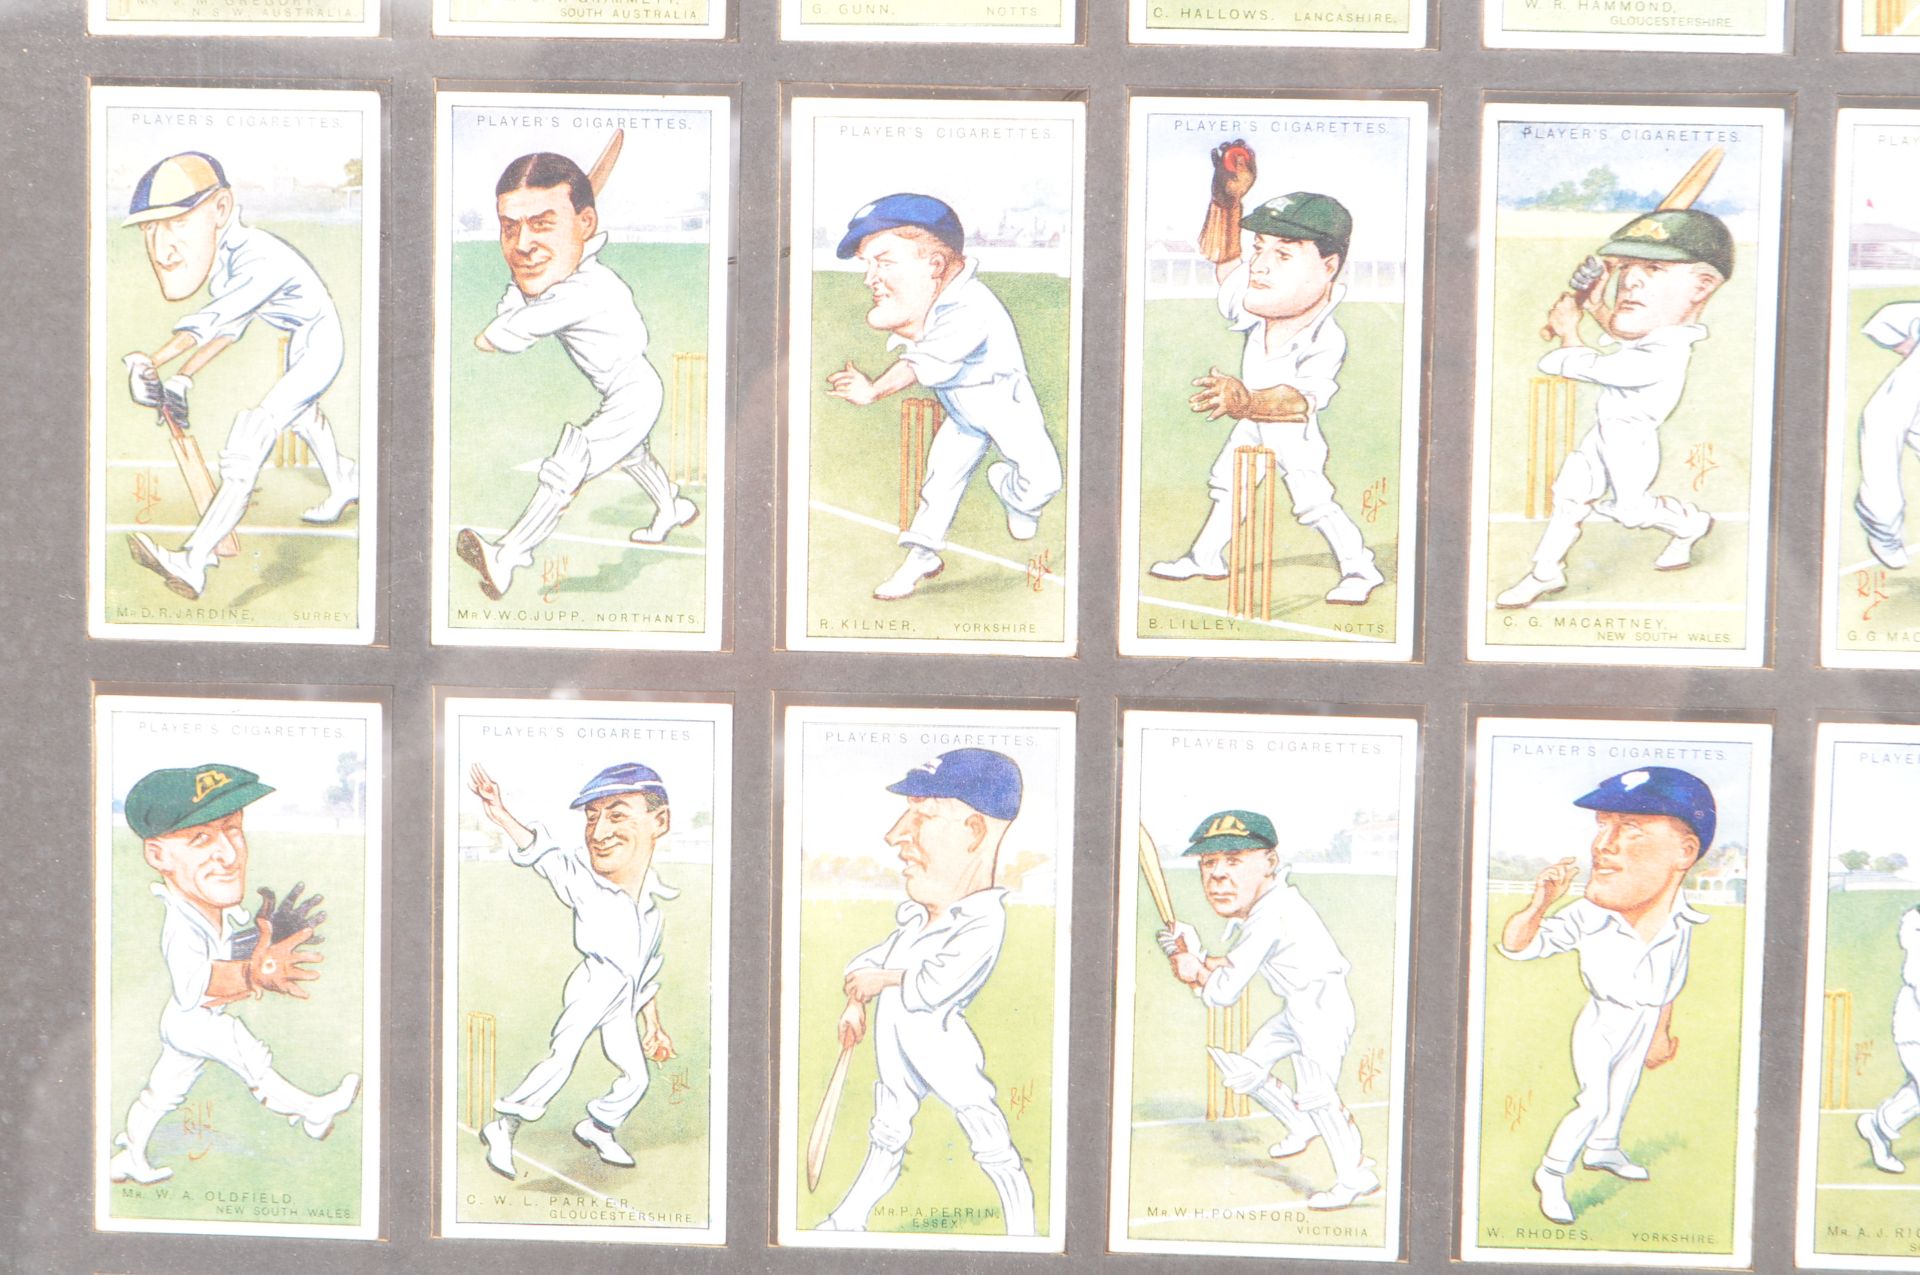 PLAYERS CIGARETTES - COLLECTION OF CRICKET CIGARETTE CARDS - Image 4 of 8